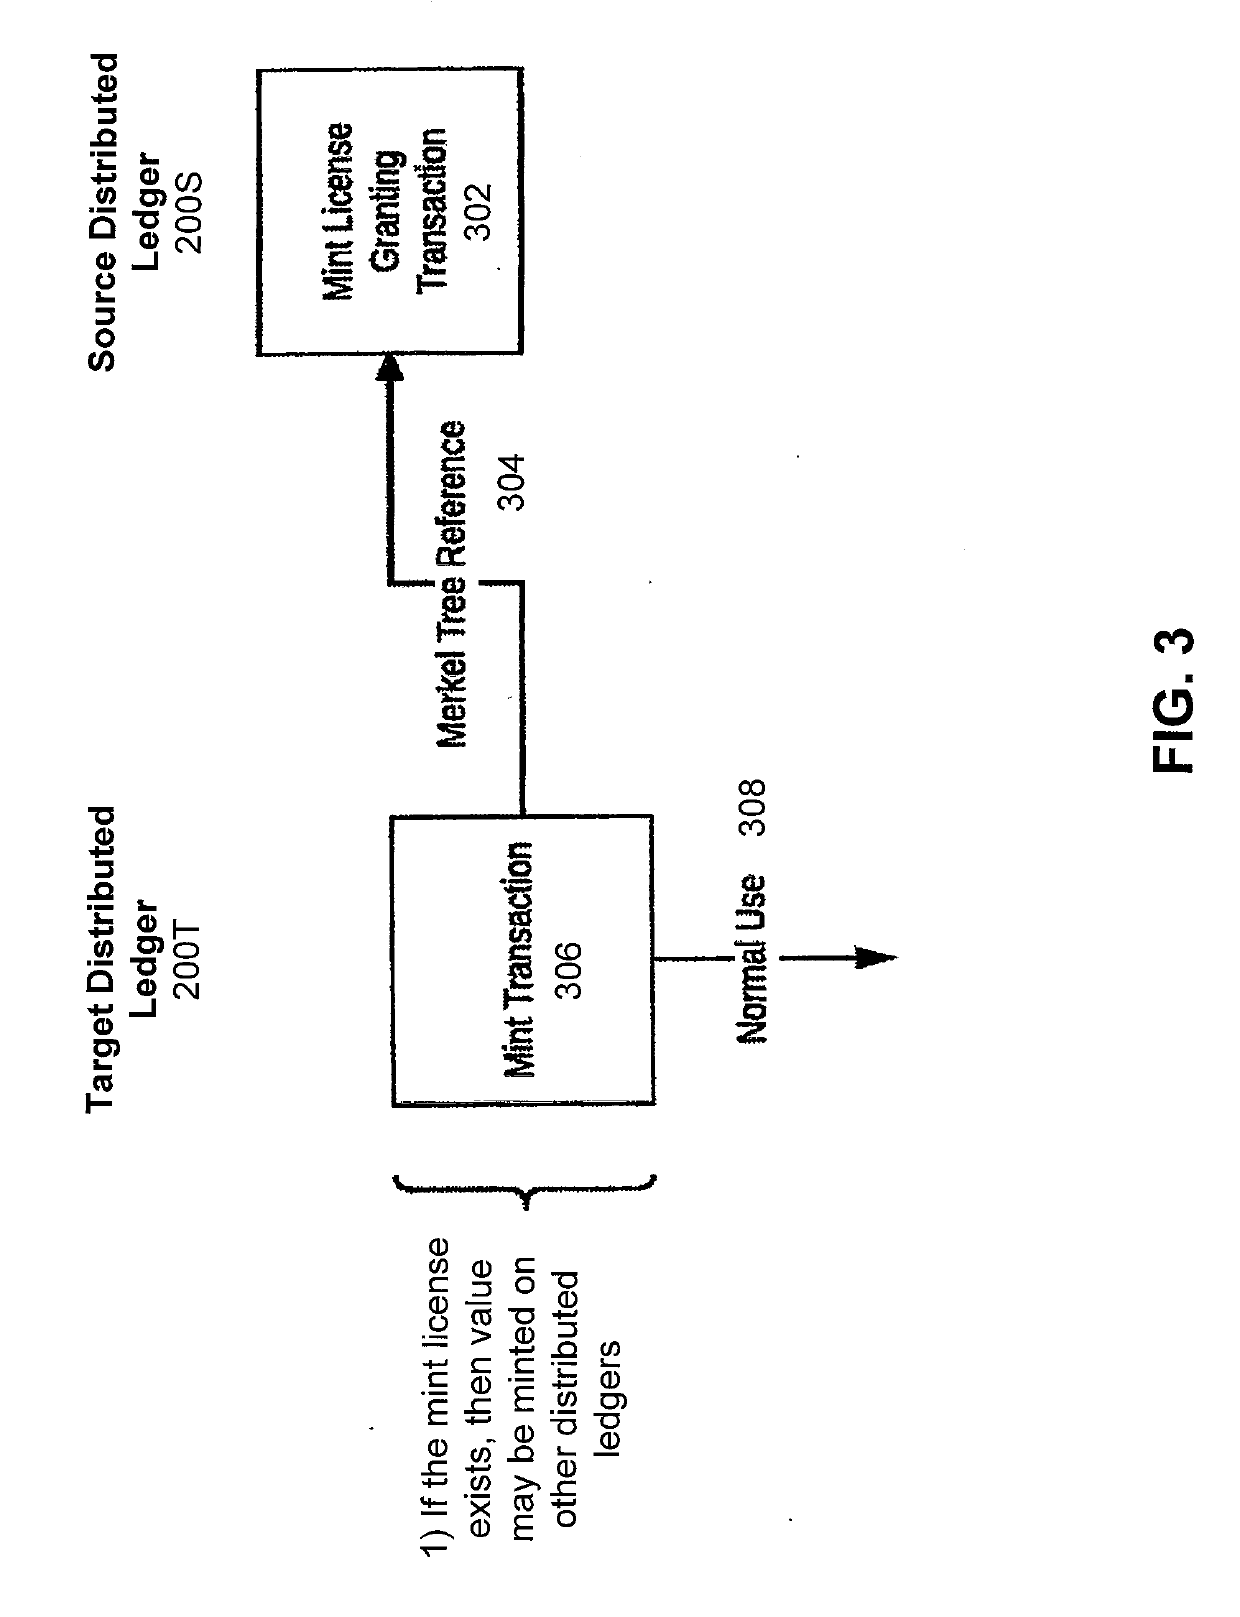 Systems of multiple distributed ledgers using cross-ledger transfers for highly-scalable transaction throughput